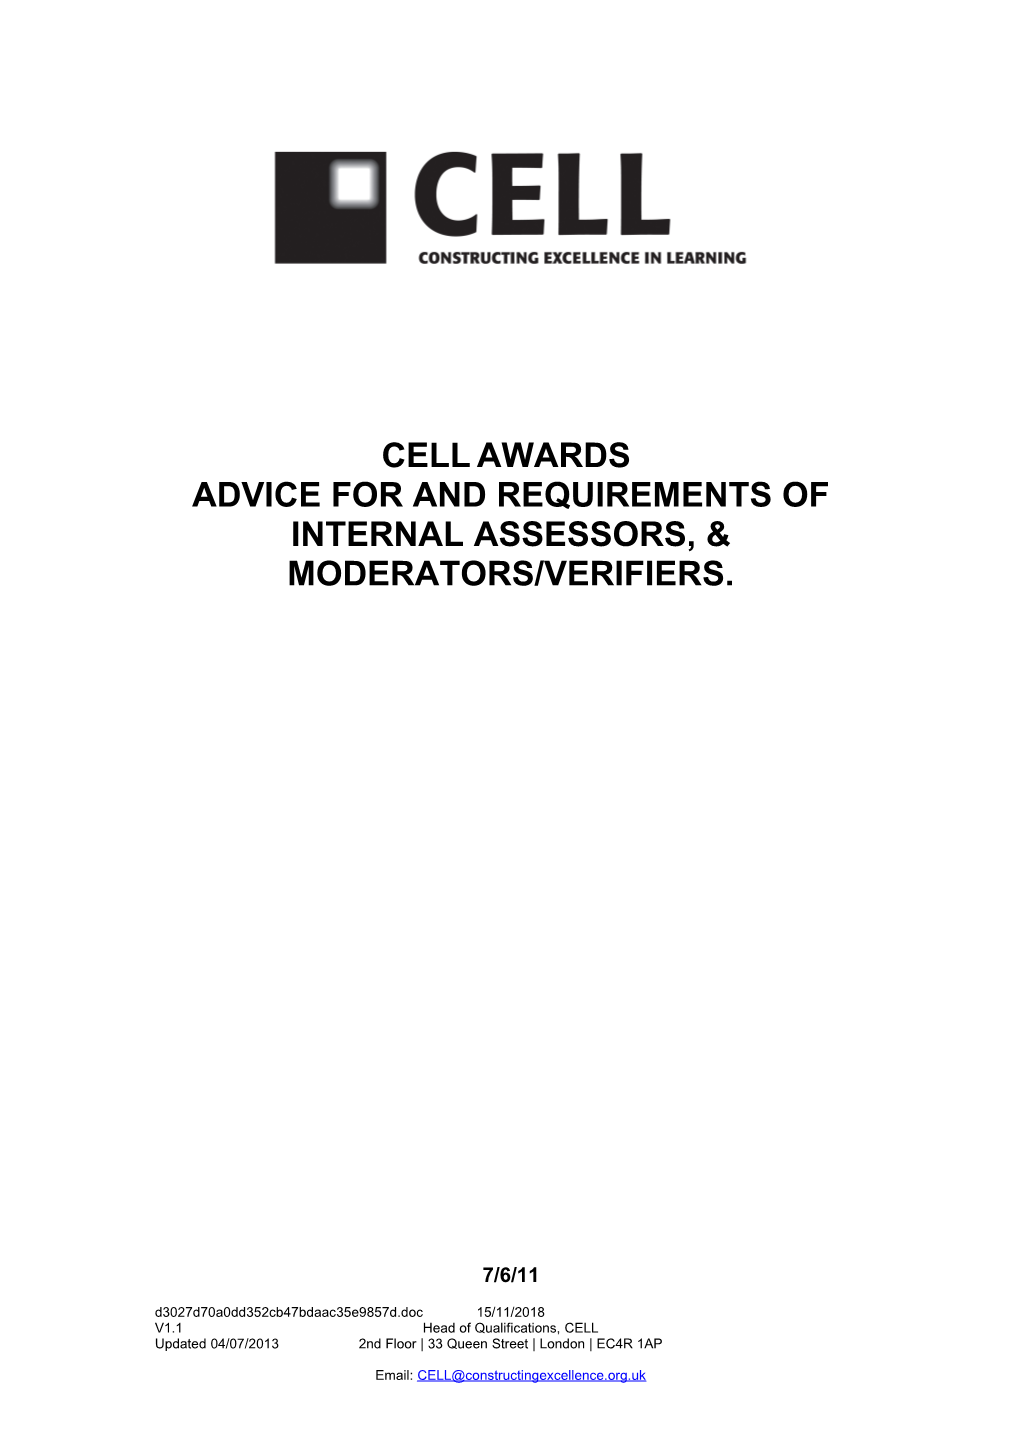 CELL AWARDS Advice for Assessors Moderators and Verifiers